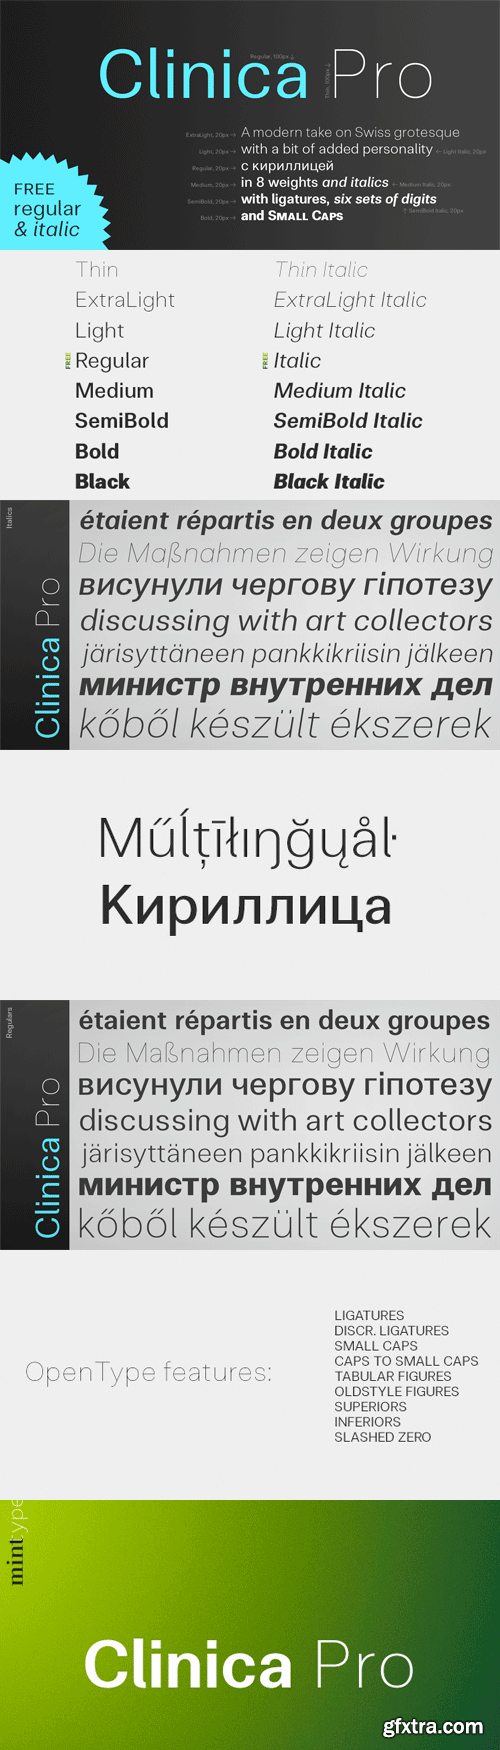 Clinica Pro Font Family - 16 Fonts for $280